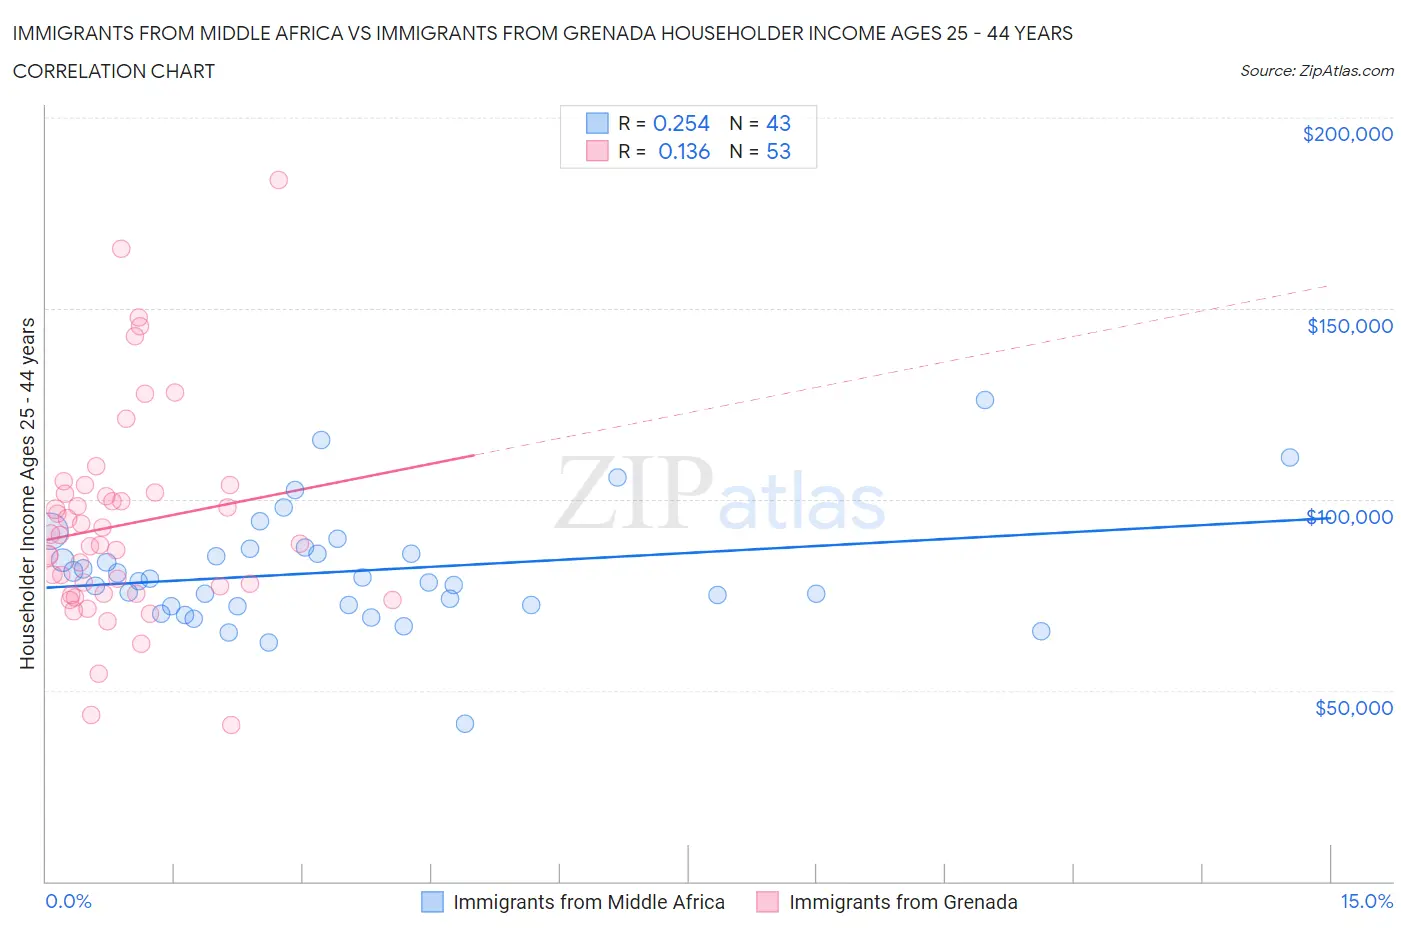 Immigrants from Middle Africa vs Immigrants from Grenada Householder Income Ages 25 - 44 years